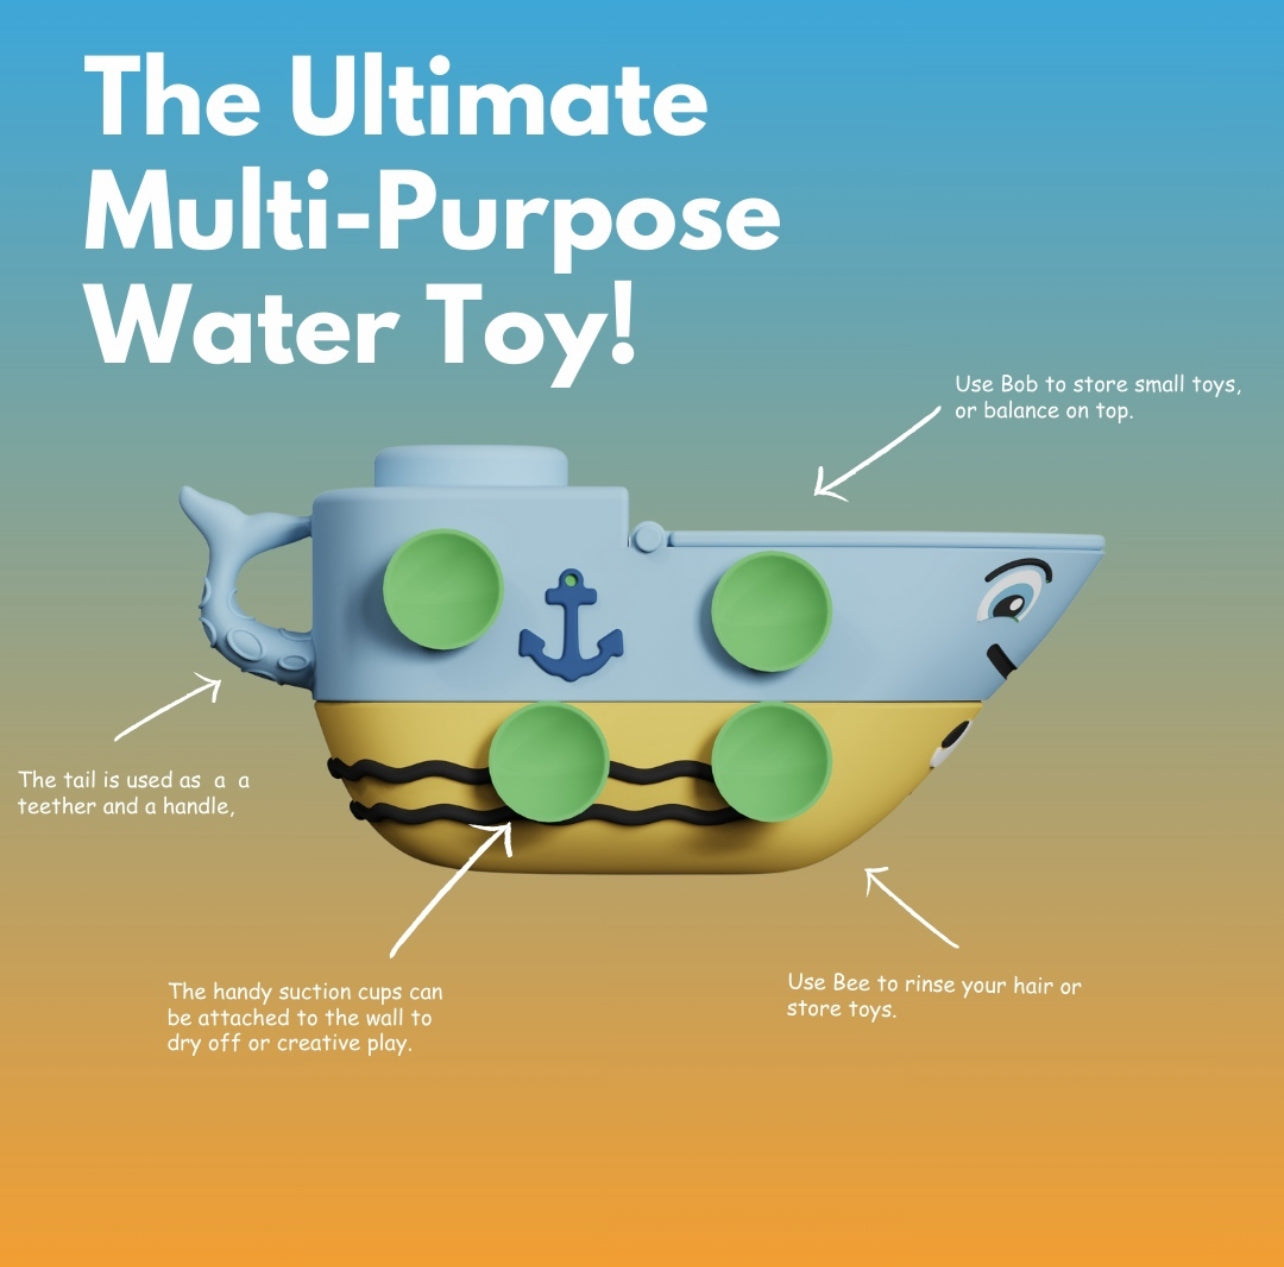 BobBee: The Ultimate Water Toy